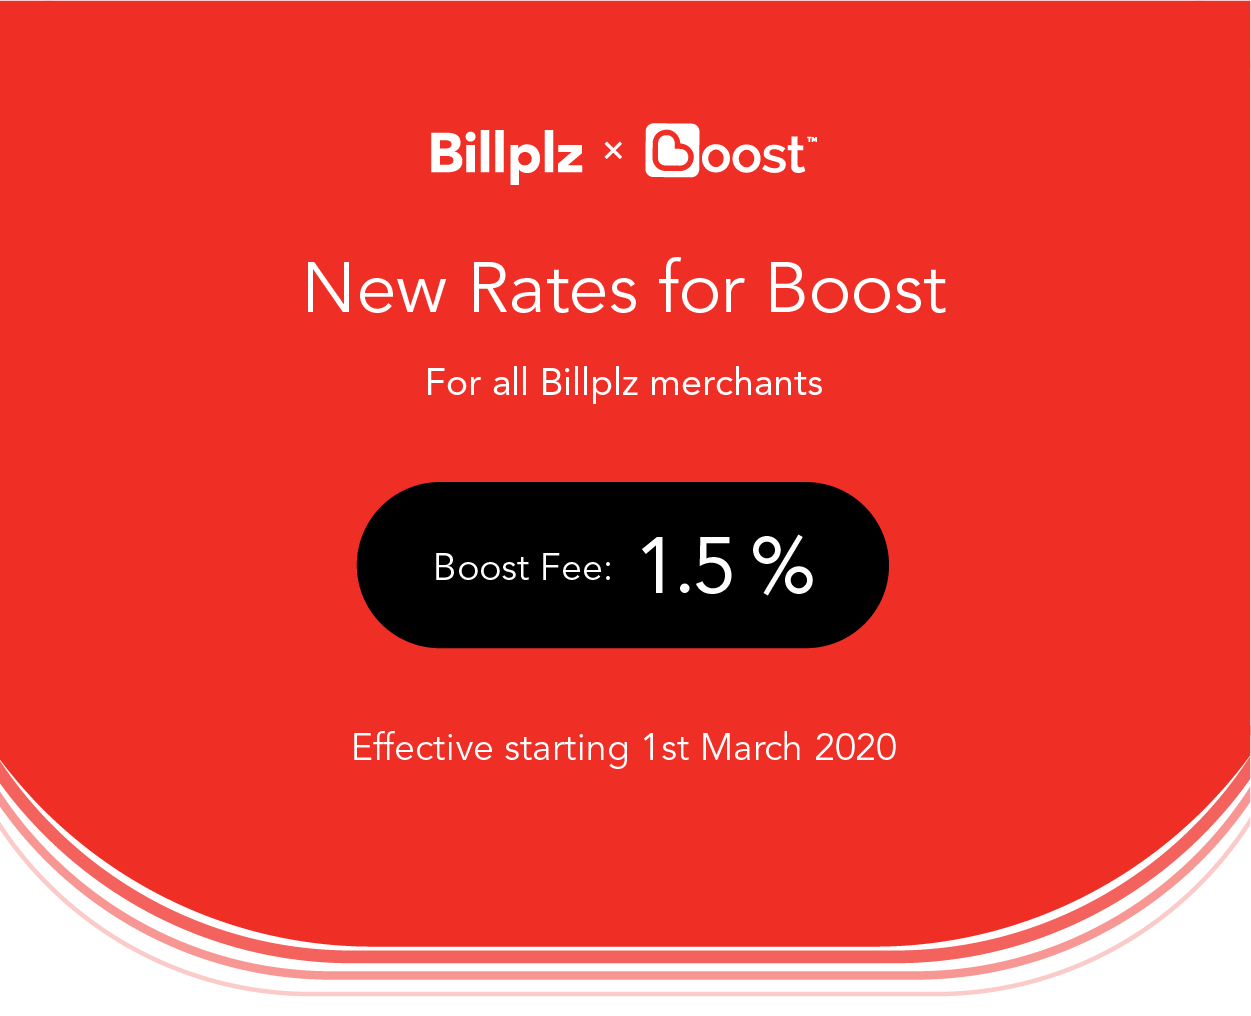 Boost new rates